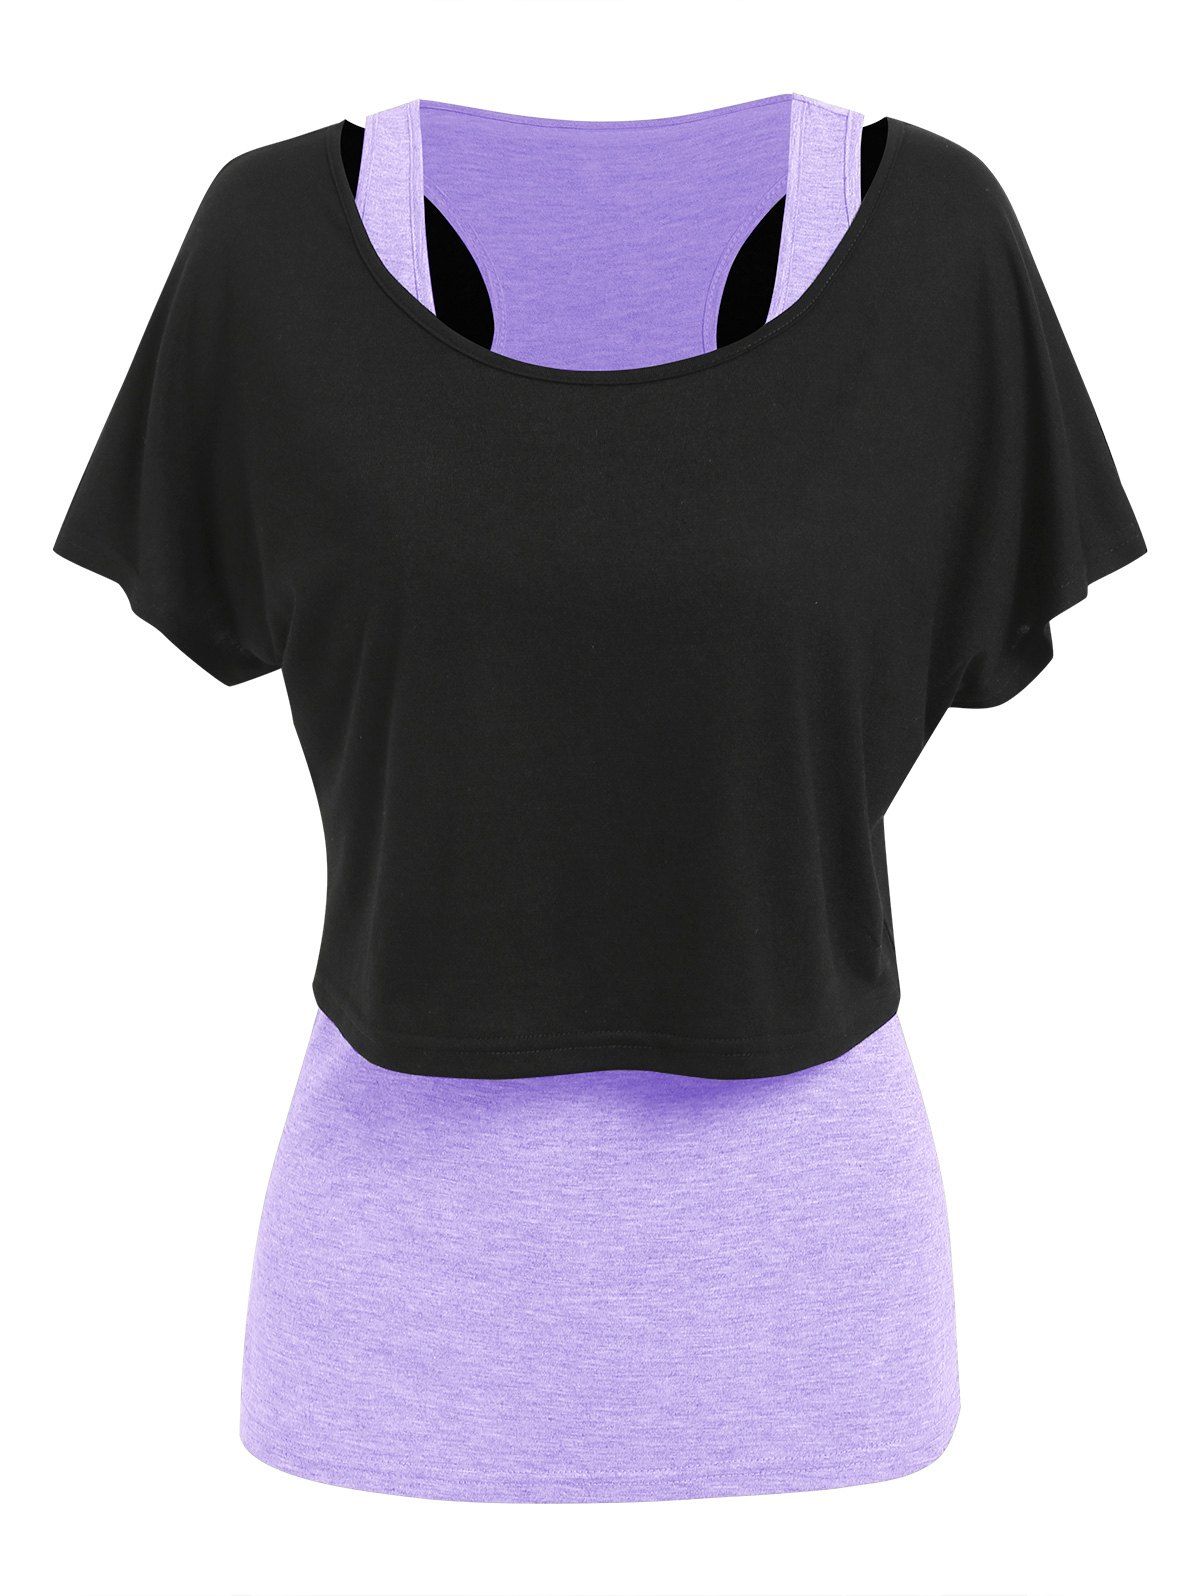 Sporty Cropped Plain Scoop Neck T Shirt and Heathered Tank Top Set - LIGHT PURPLE XL